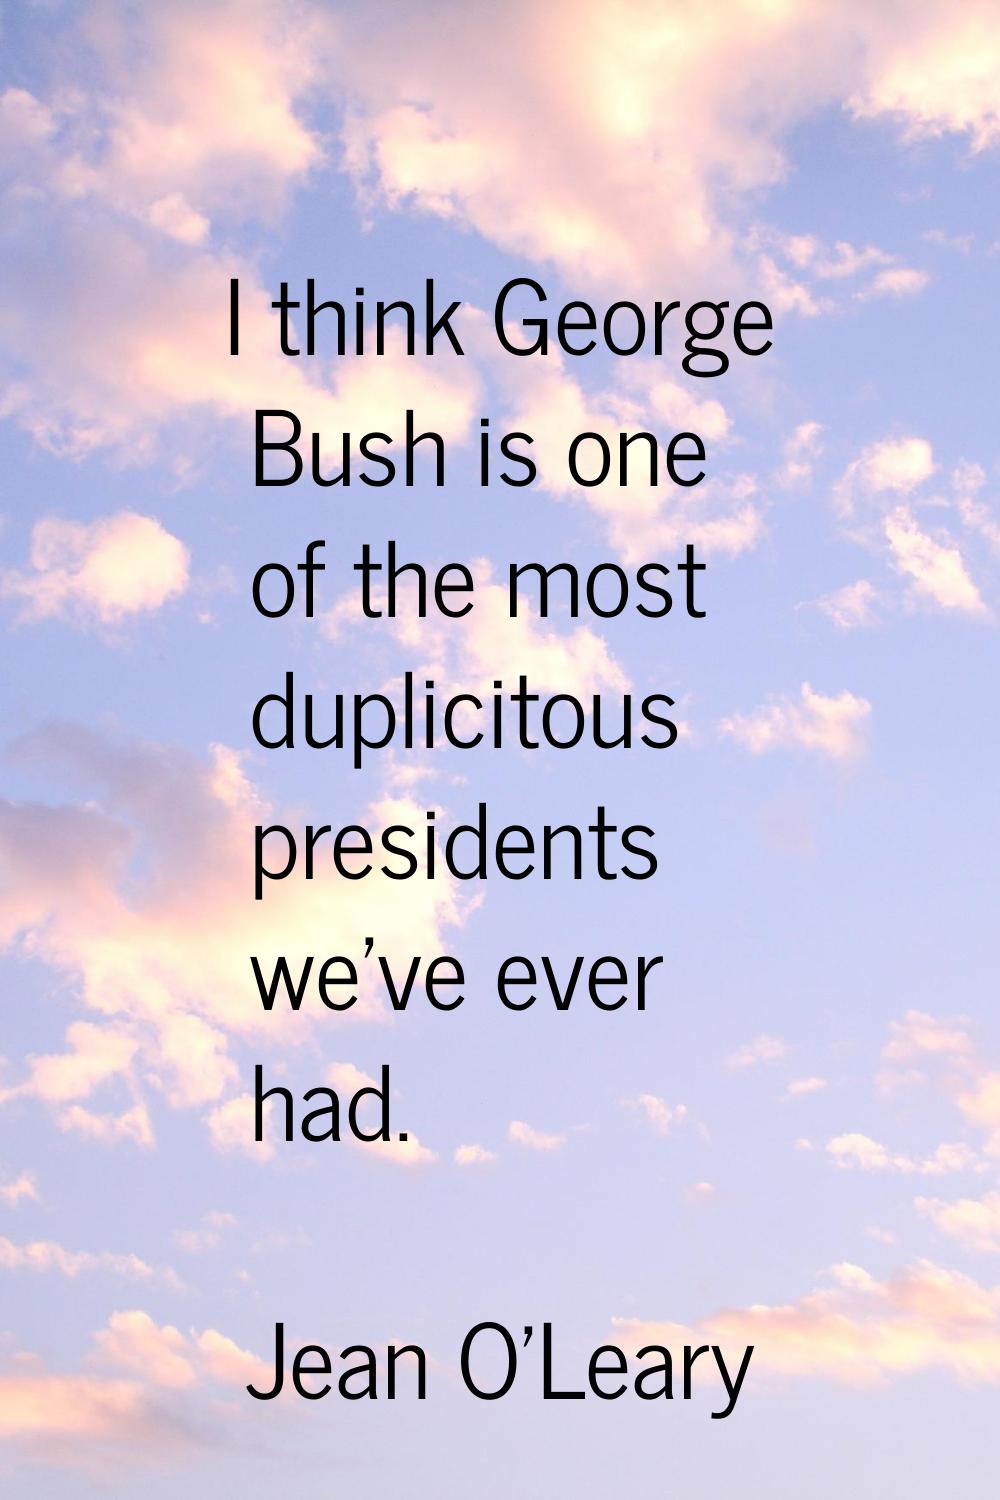 I think George Bush is one of the most duplicitous presidents we've ever had.